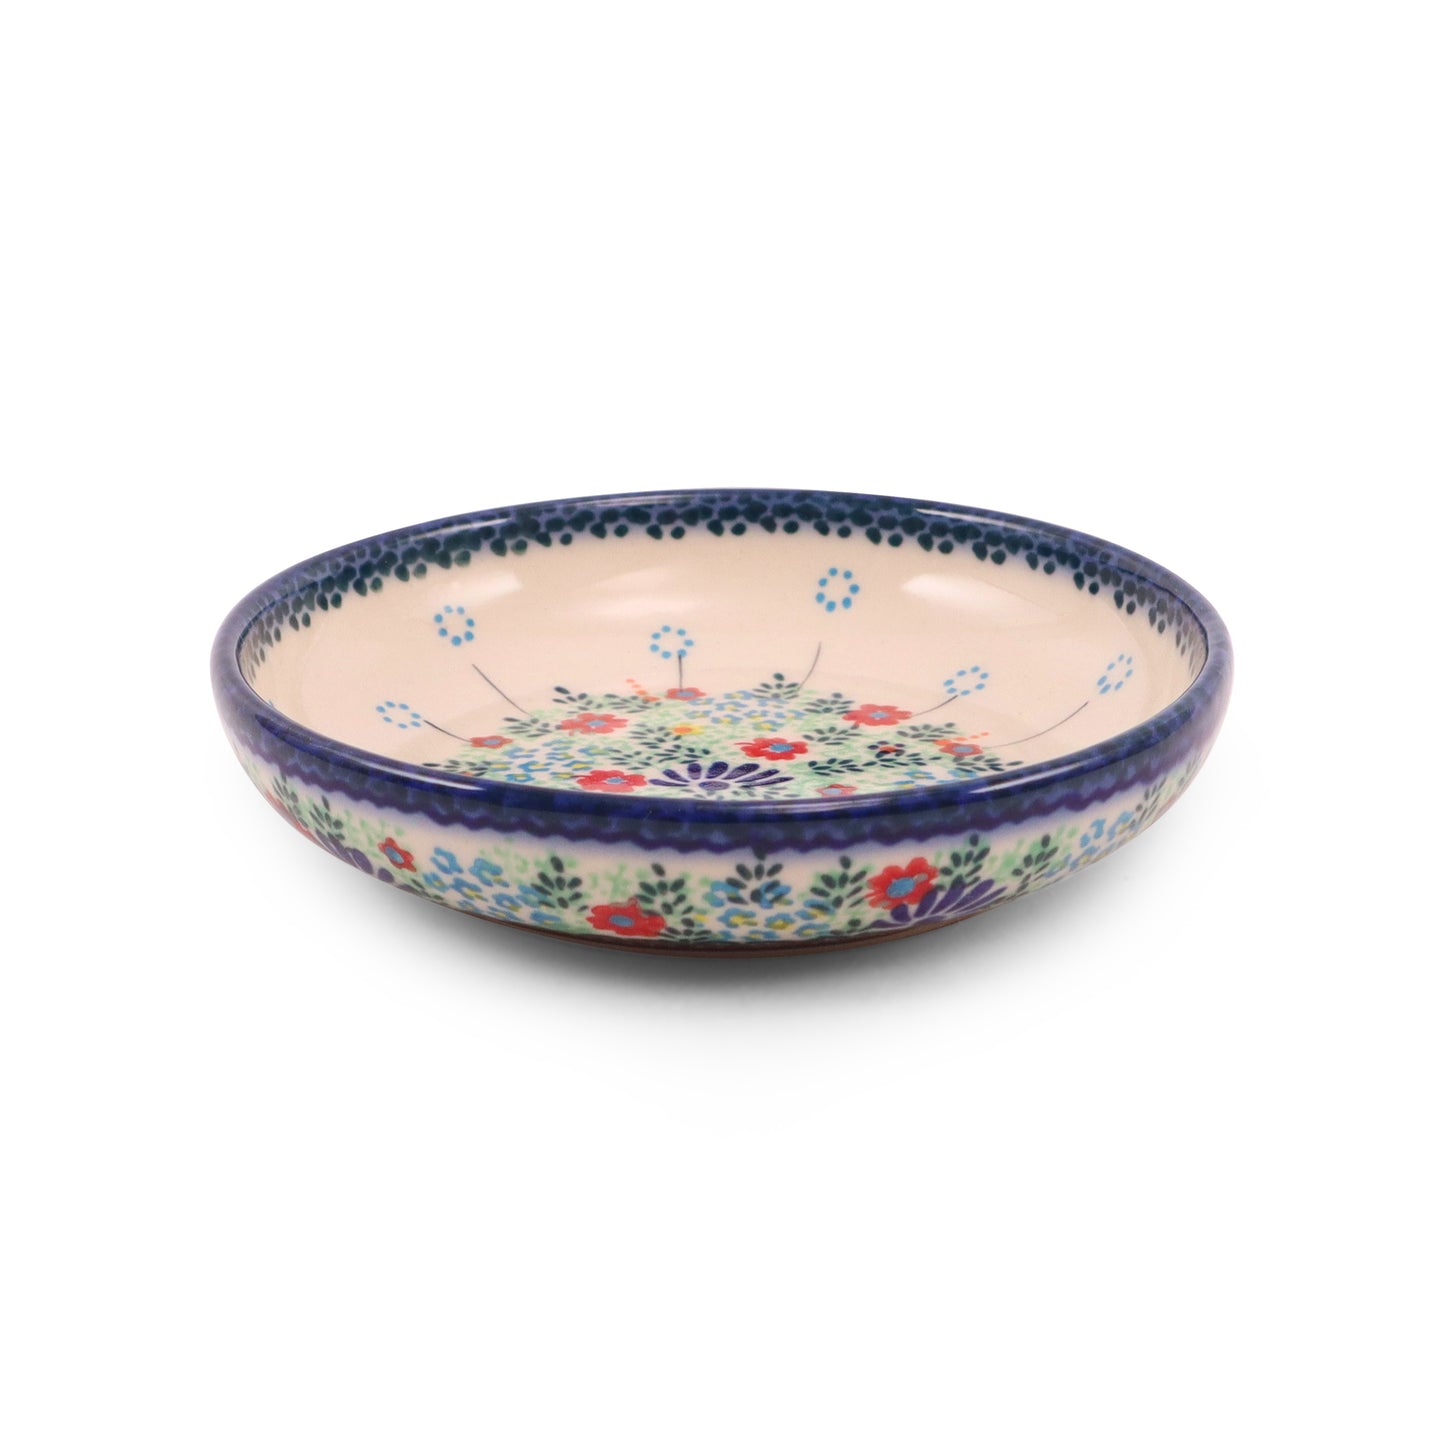 5.5" Shallow Bowl. Pattern: Spring Bouquet